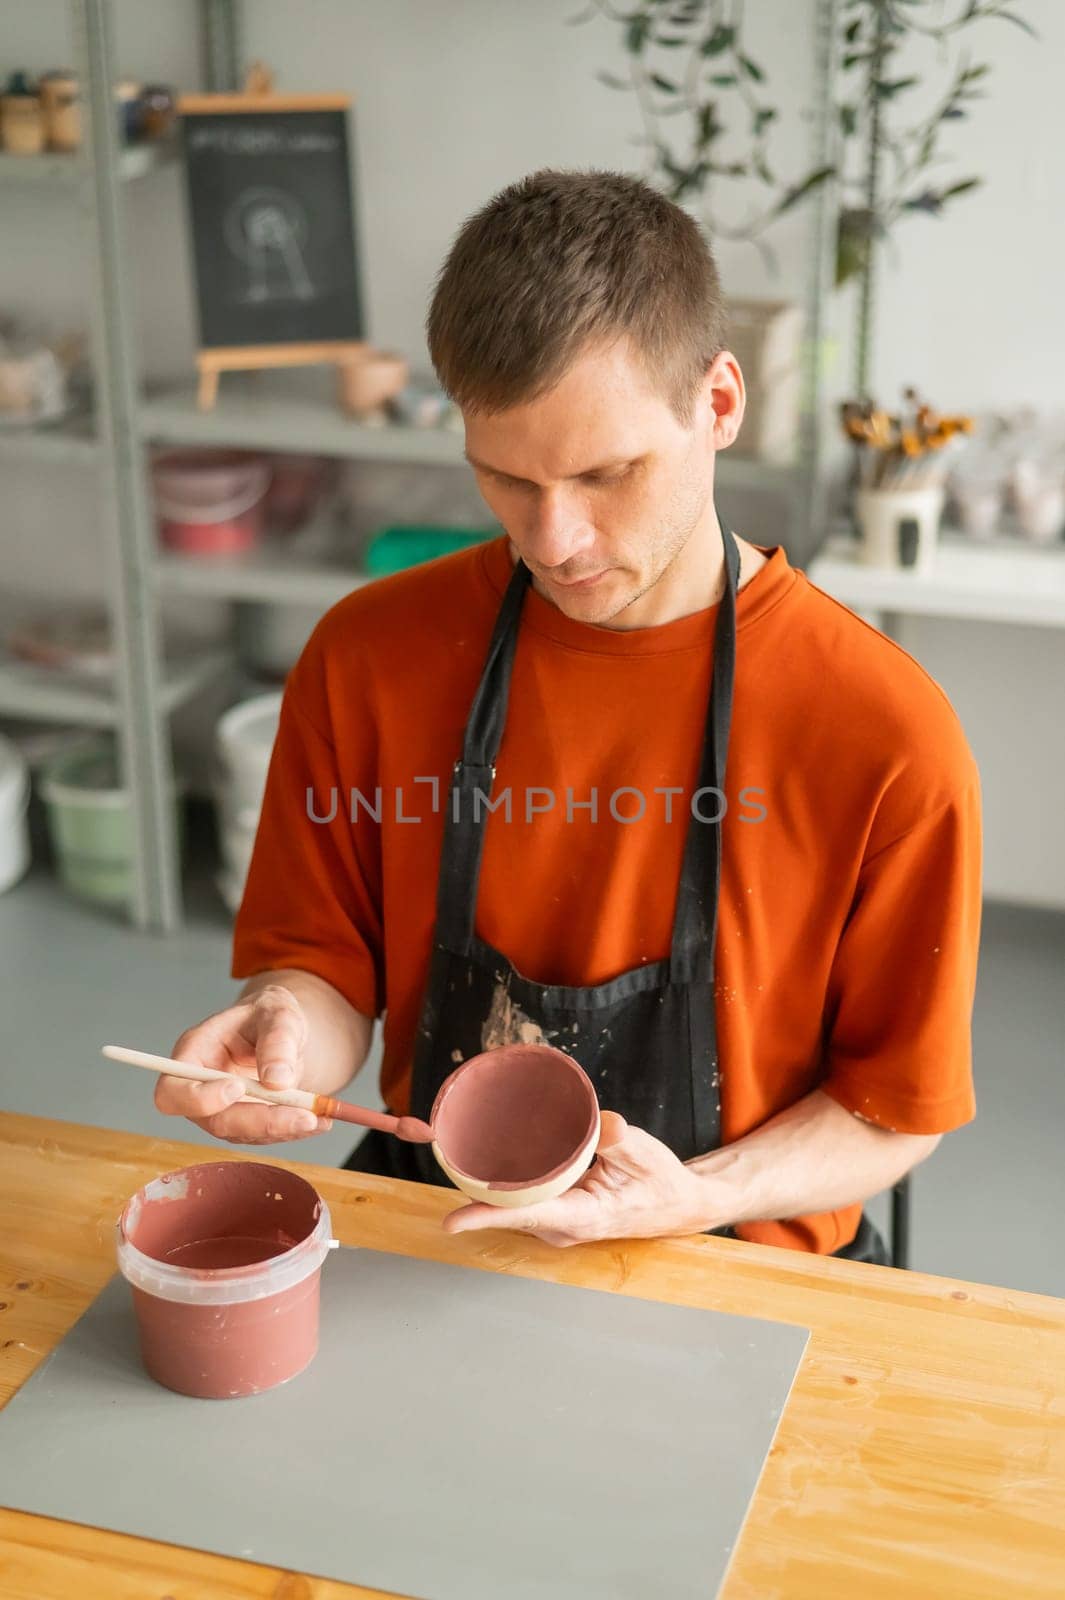 Potter paints ceramic dishes with a brush. Vertical photo